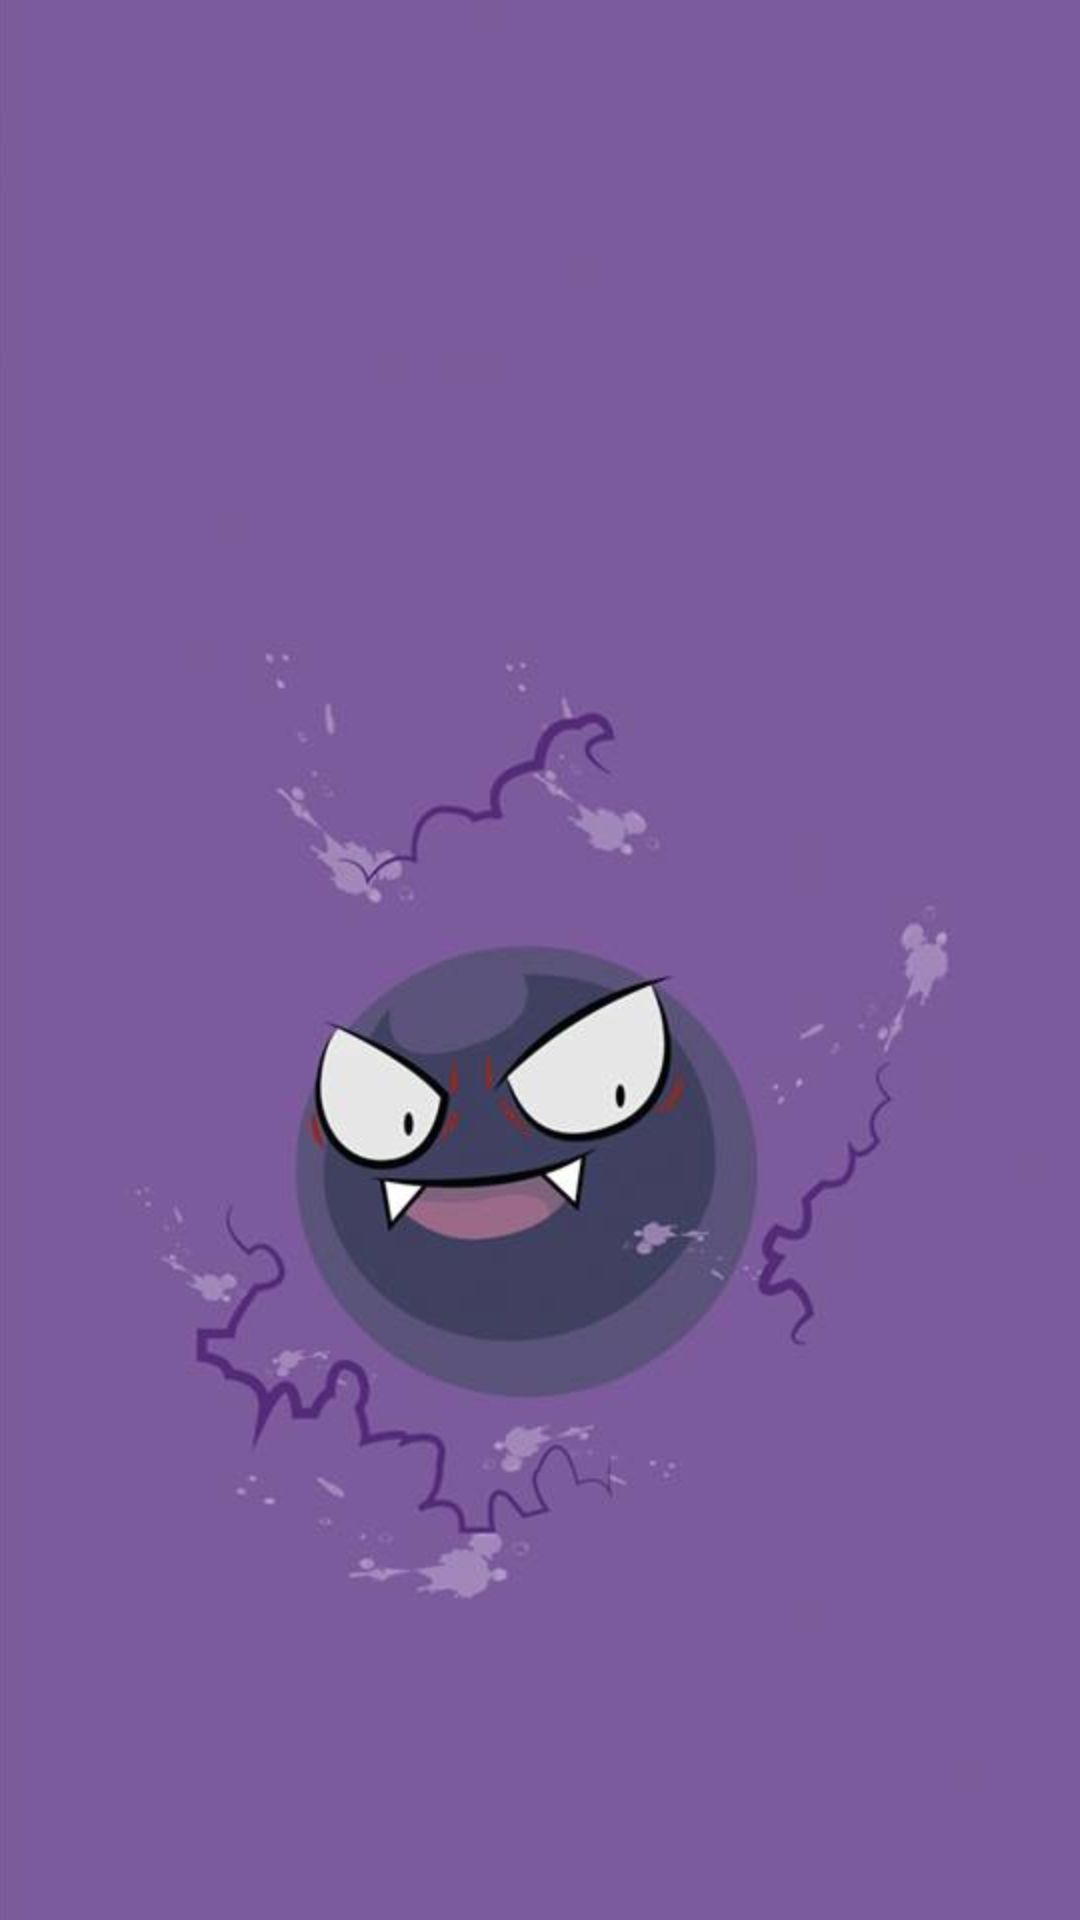 Gastly to see more Pokemon Go iPhone wallpaper!. Cute pokemon wallpaper, Pokemon, Gastly pokemon